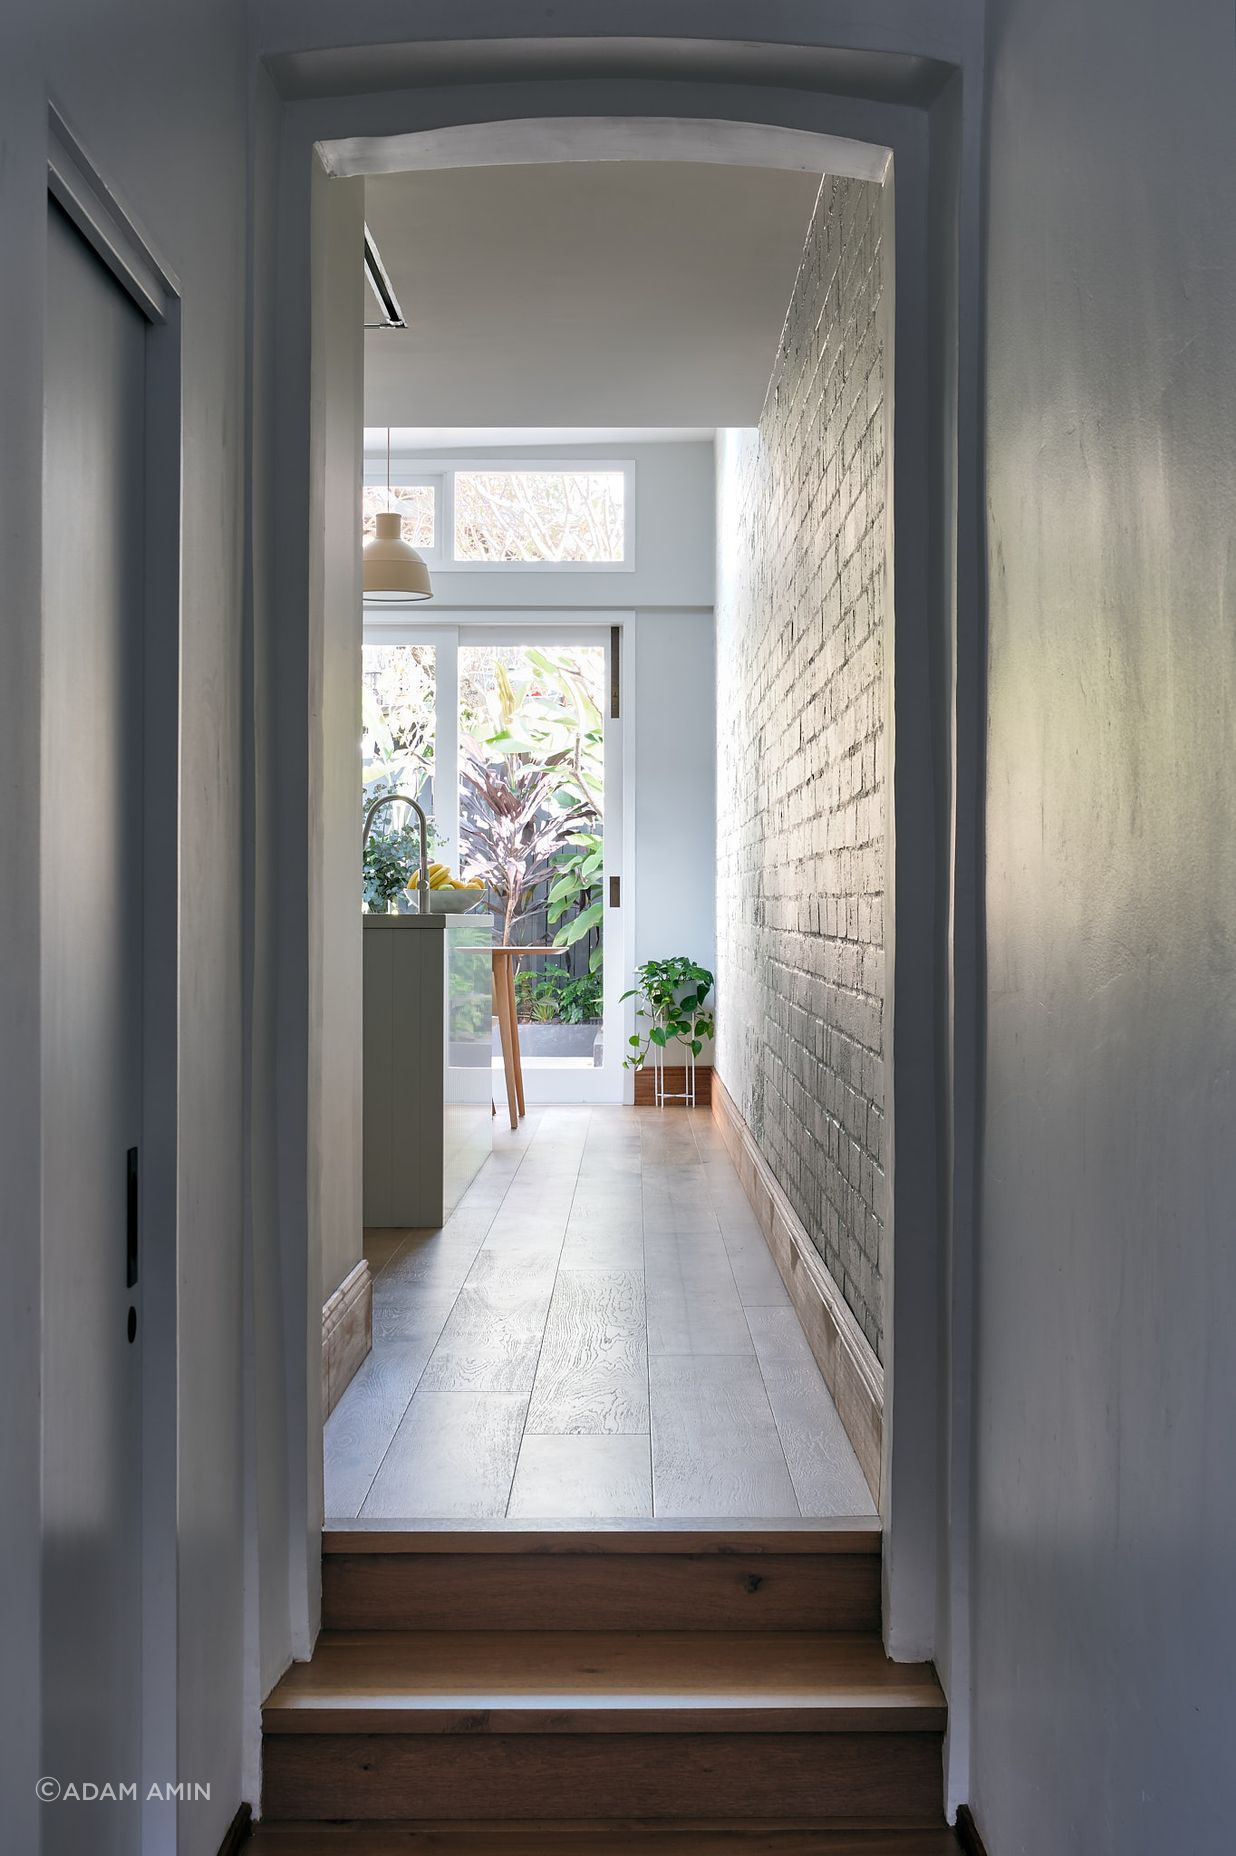 The narrow hallway leading to the home's original termination is a vestibule to the light-saturated open-plan kitchen and adjacent dining spaces.